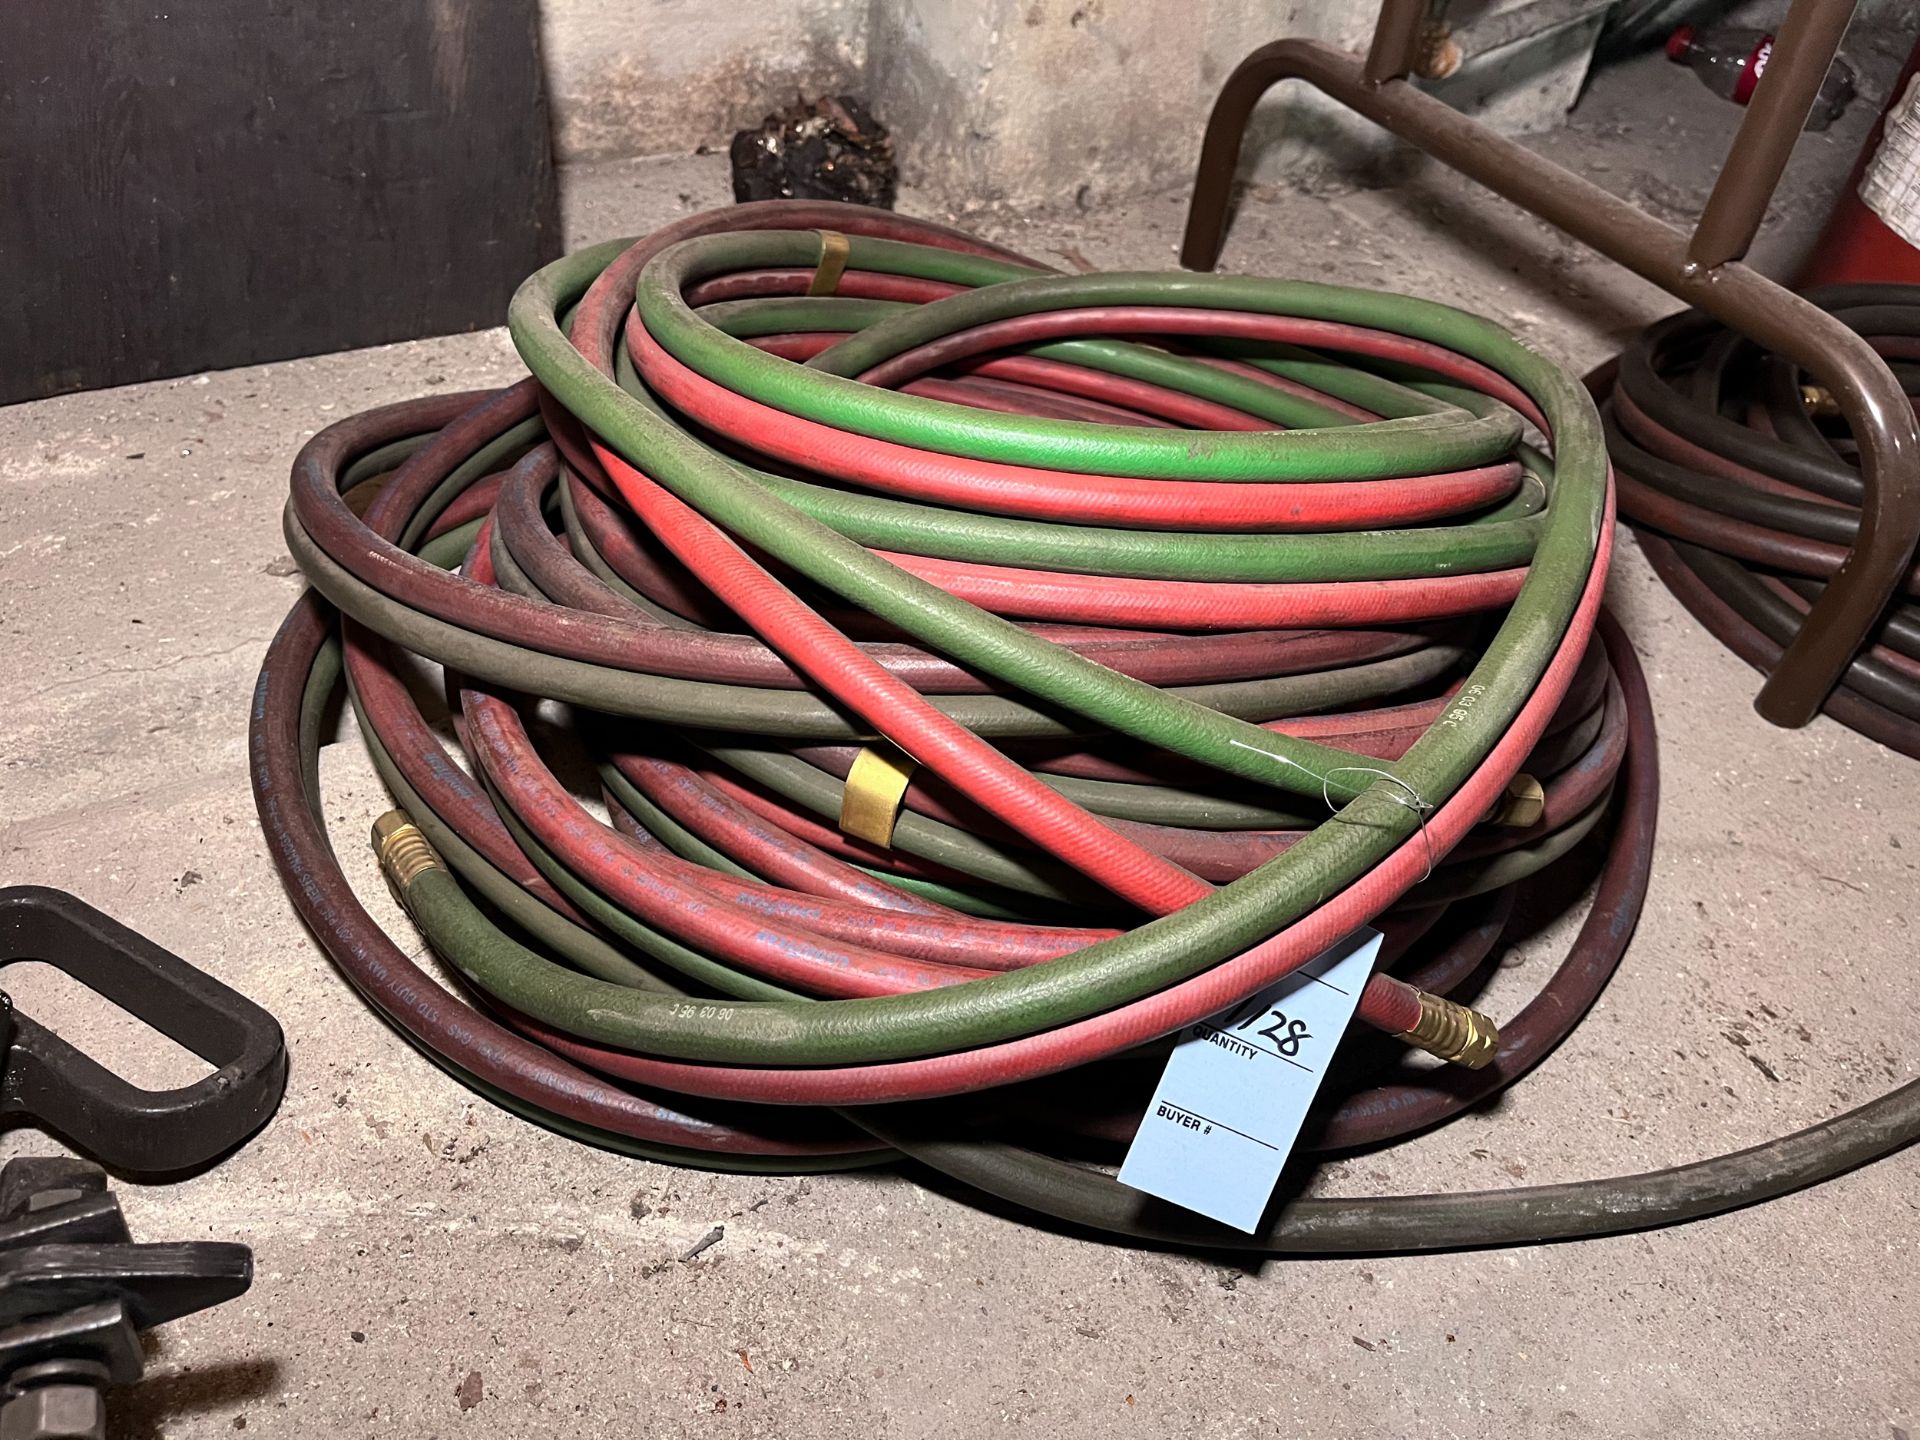 Lot of Torch Hoses